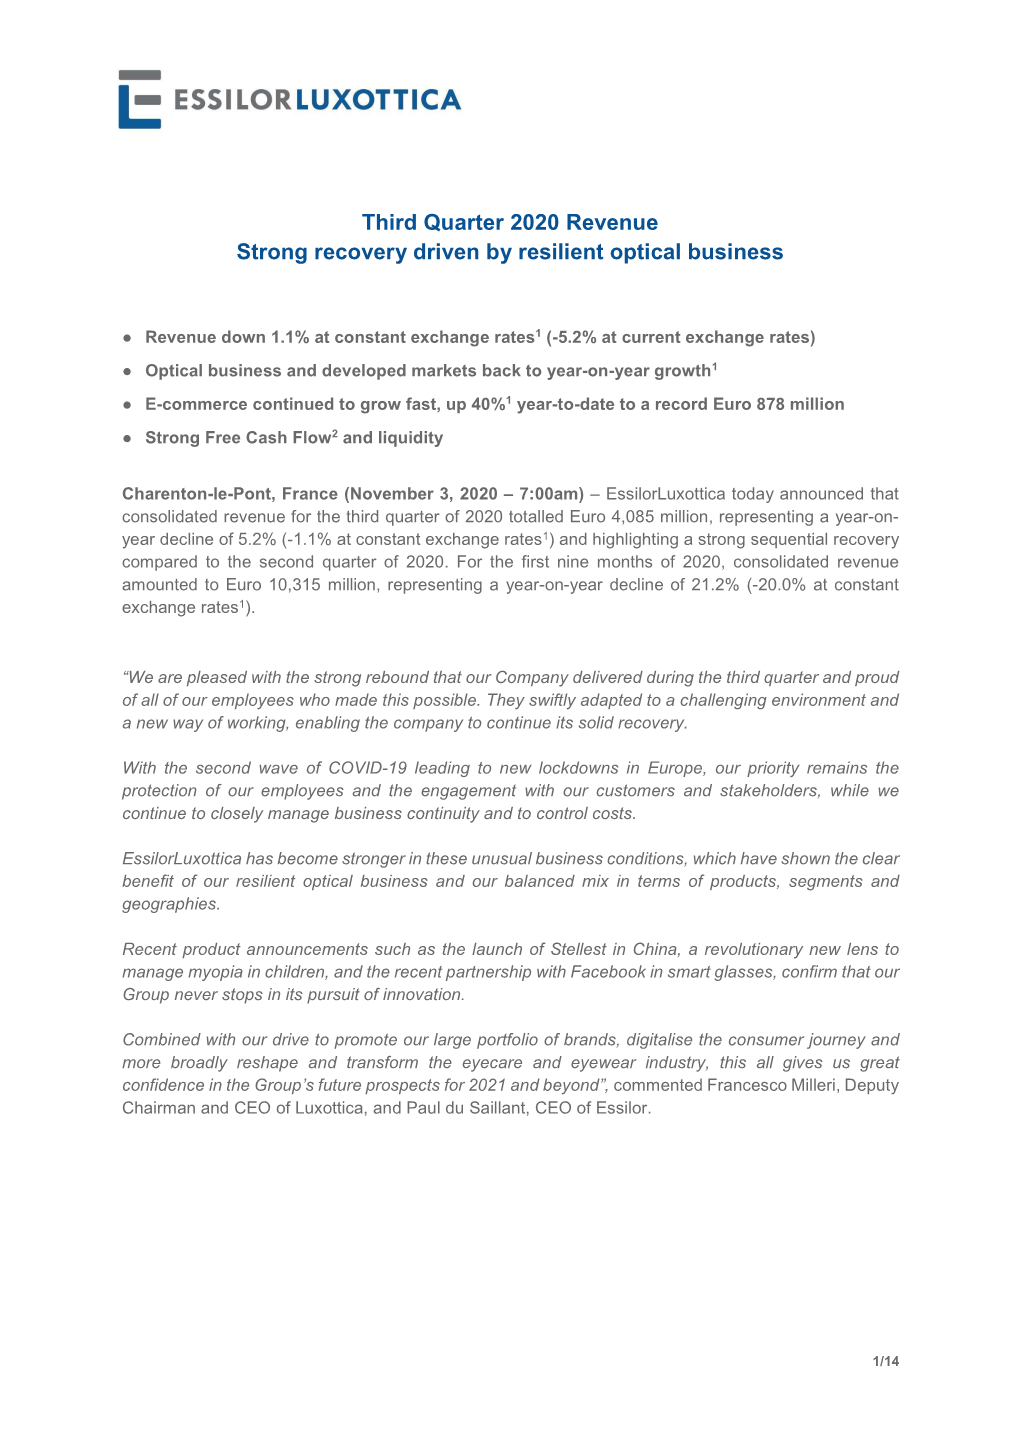 Third Quarter 2020 Revenue Strong Recovery Driven by Resilient Optical Business